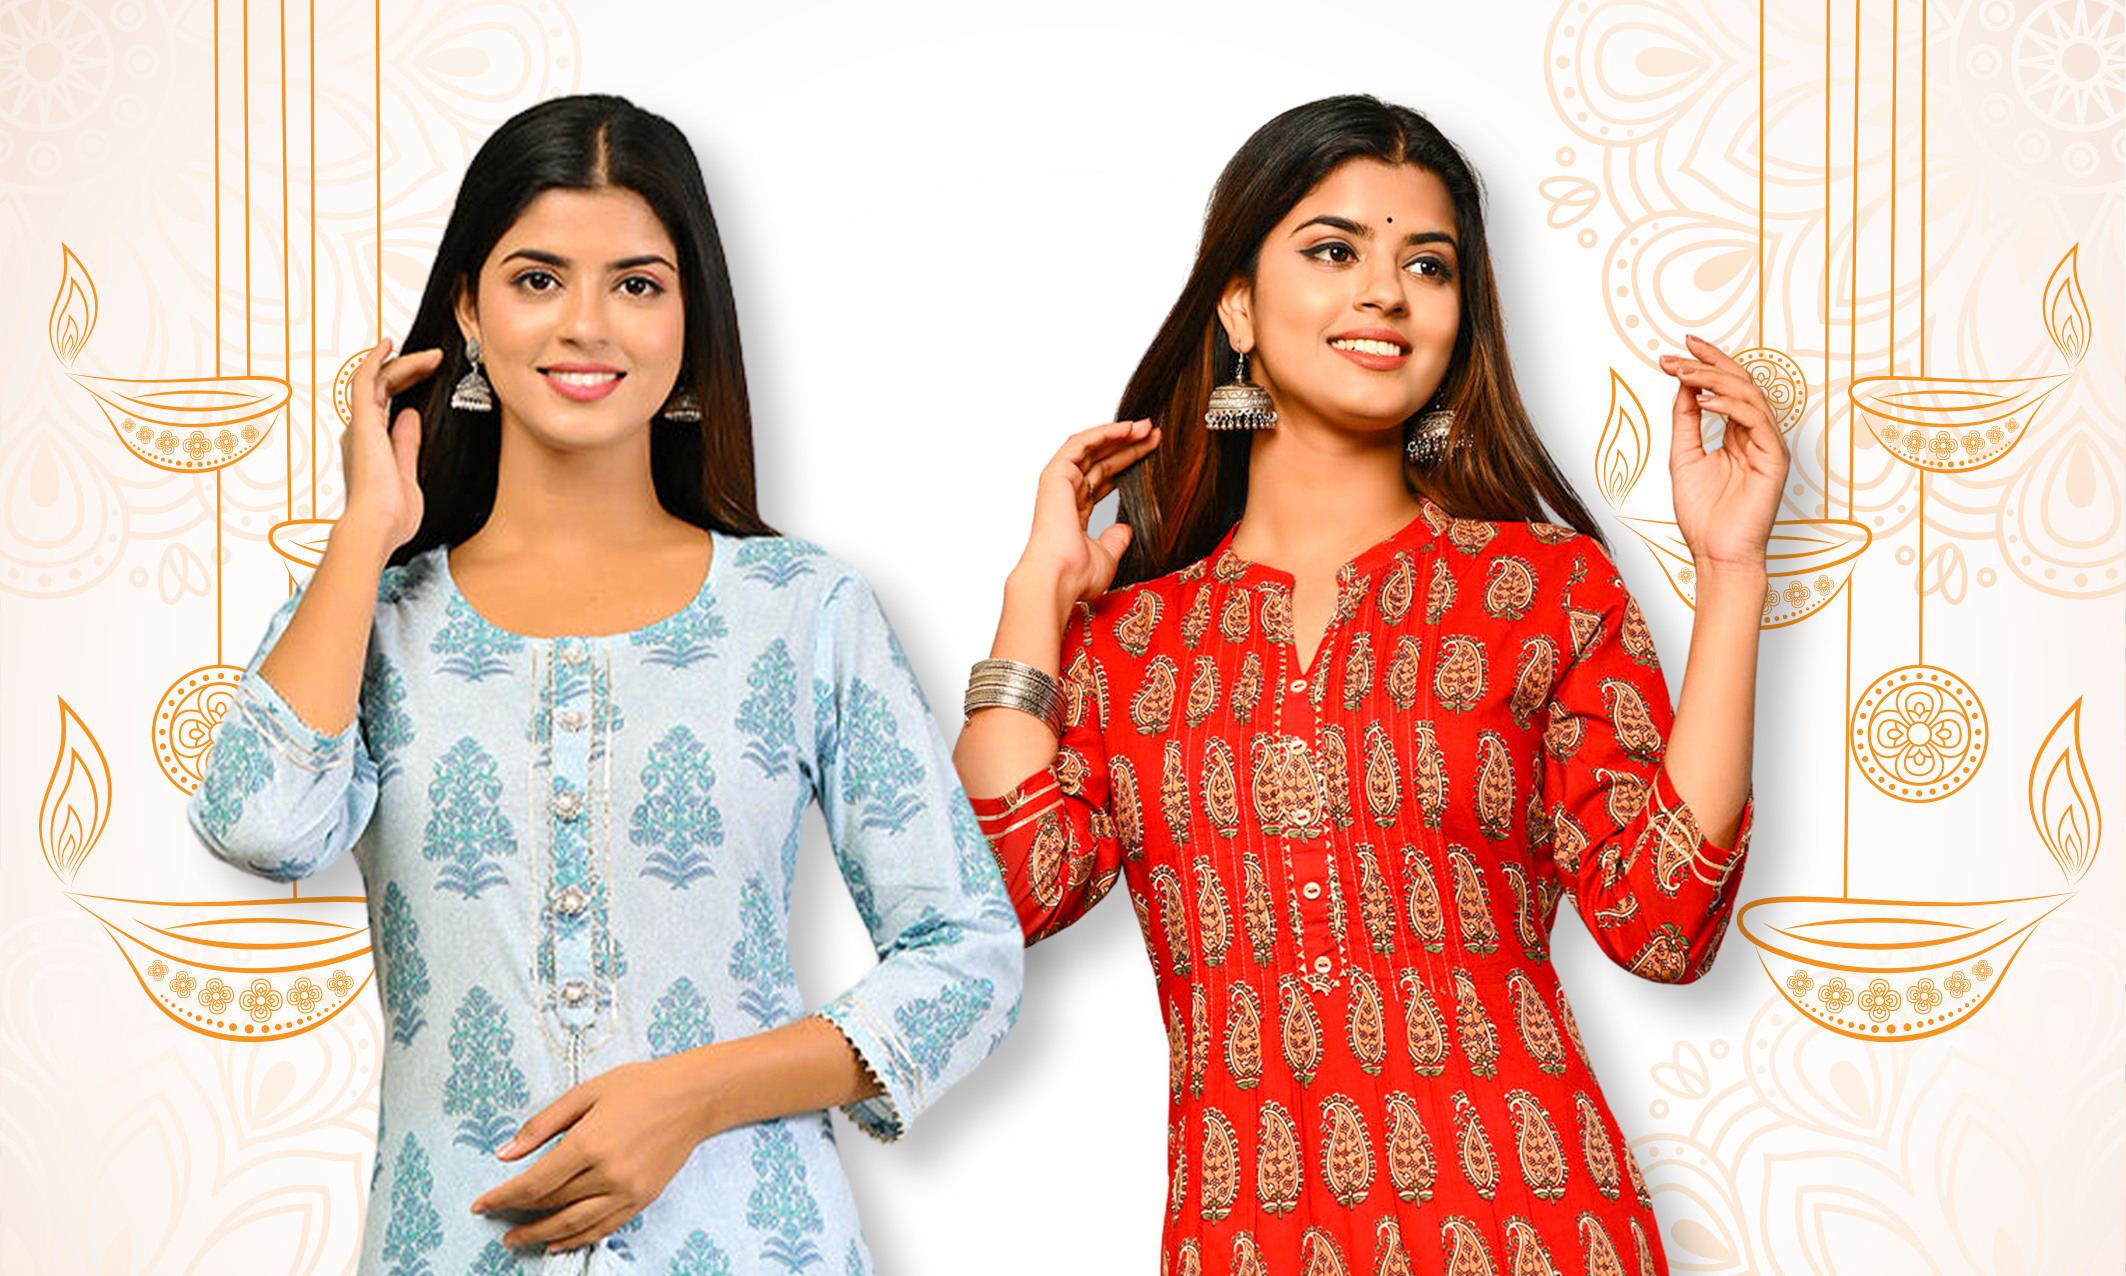 Top 5 Trendy Diwali Outfits : Modern and Ethnic Dress Ideas